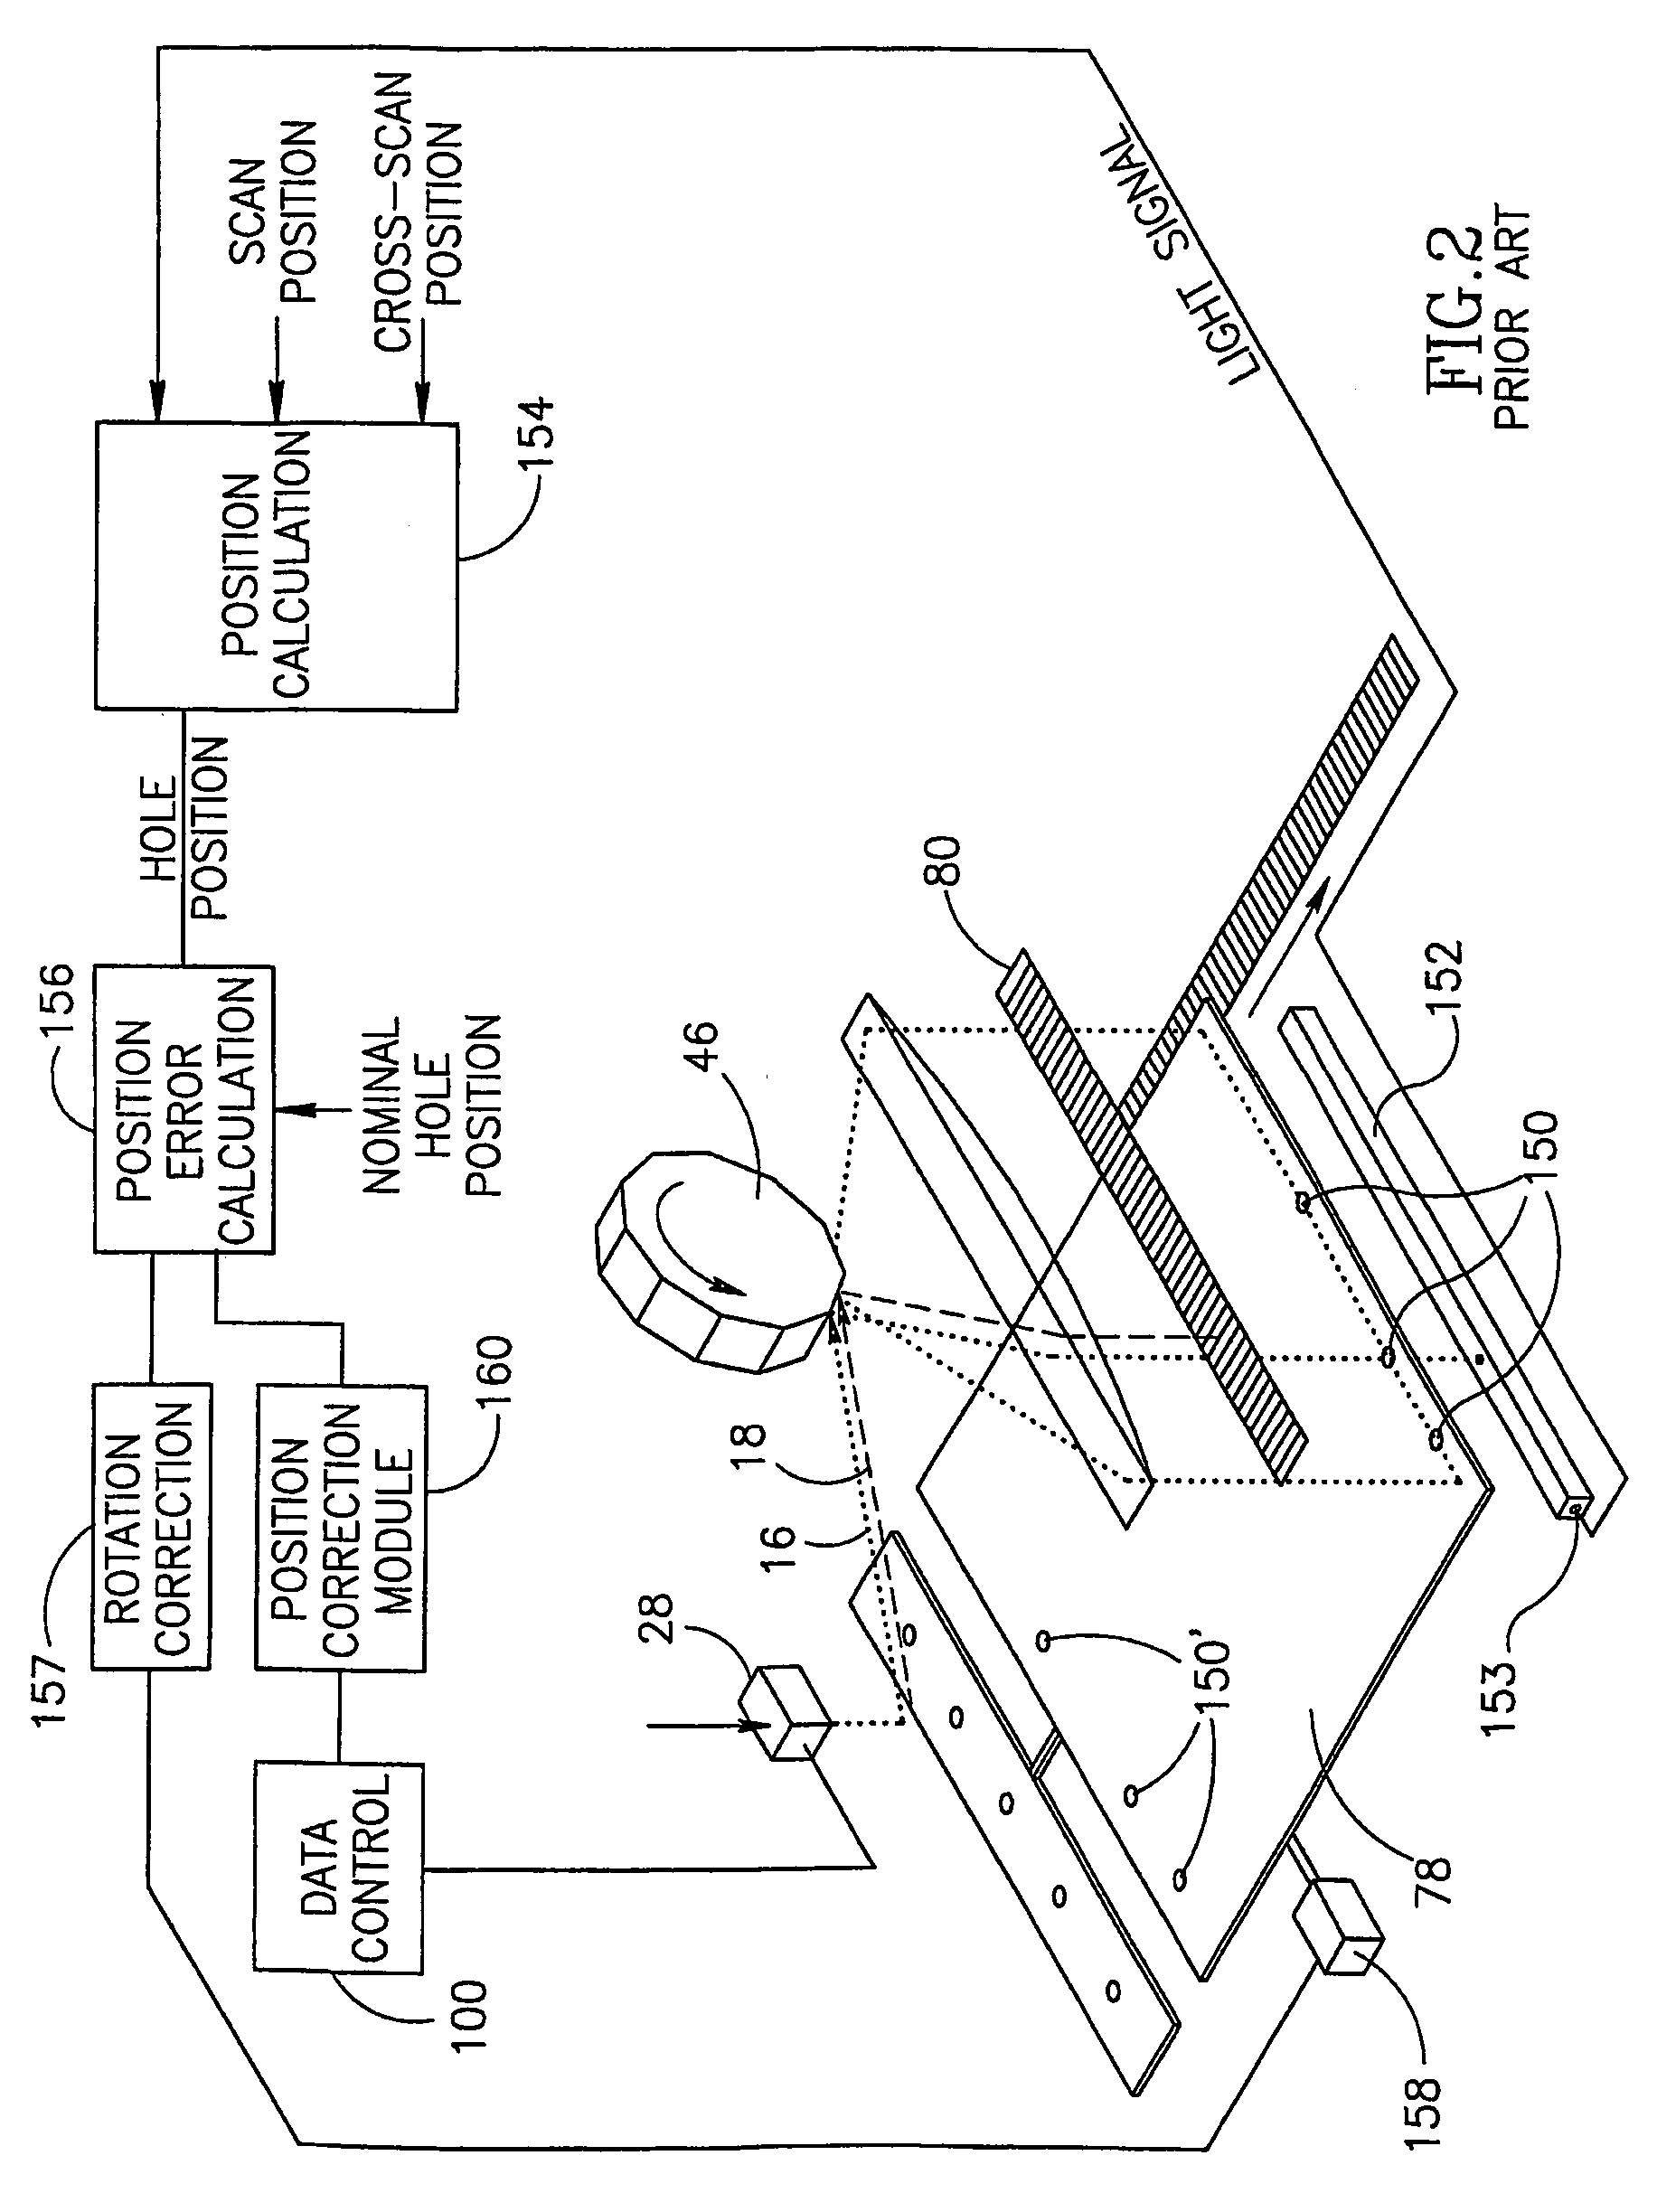 Multi-layer printed circuit board fabrication system and method